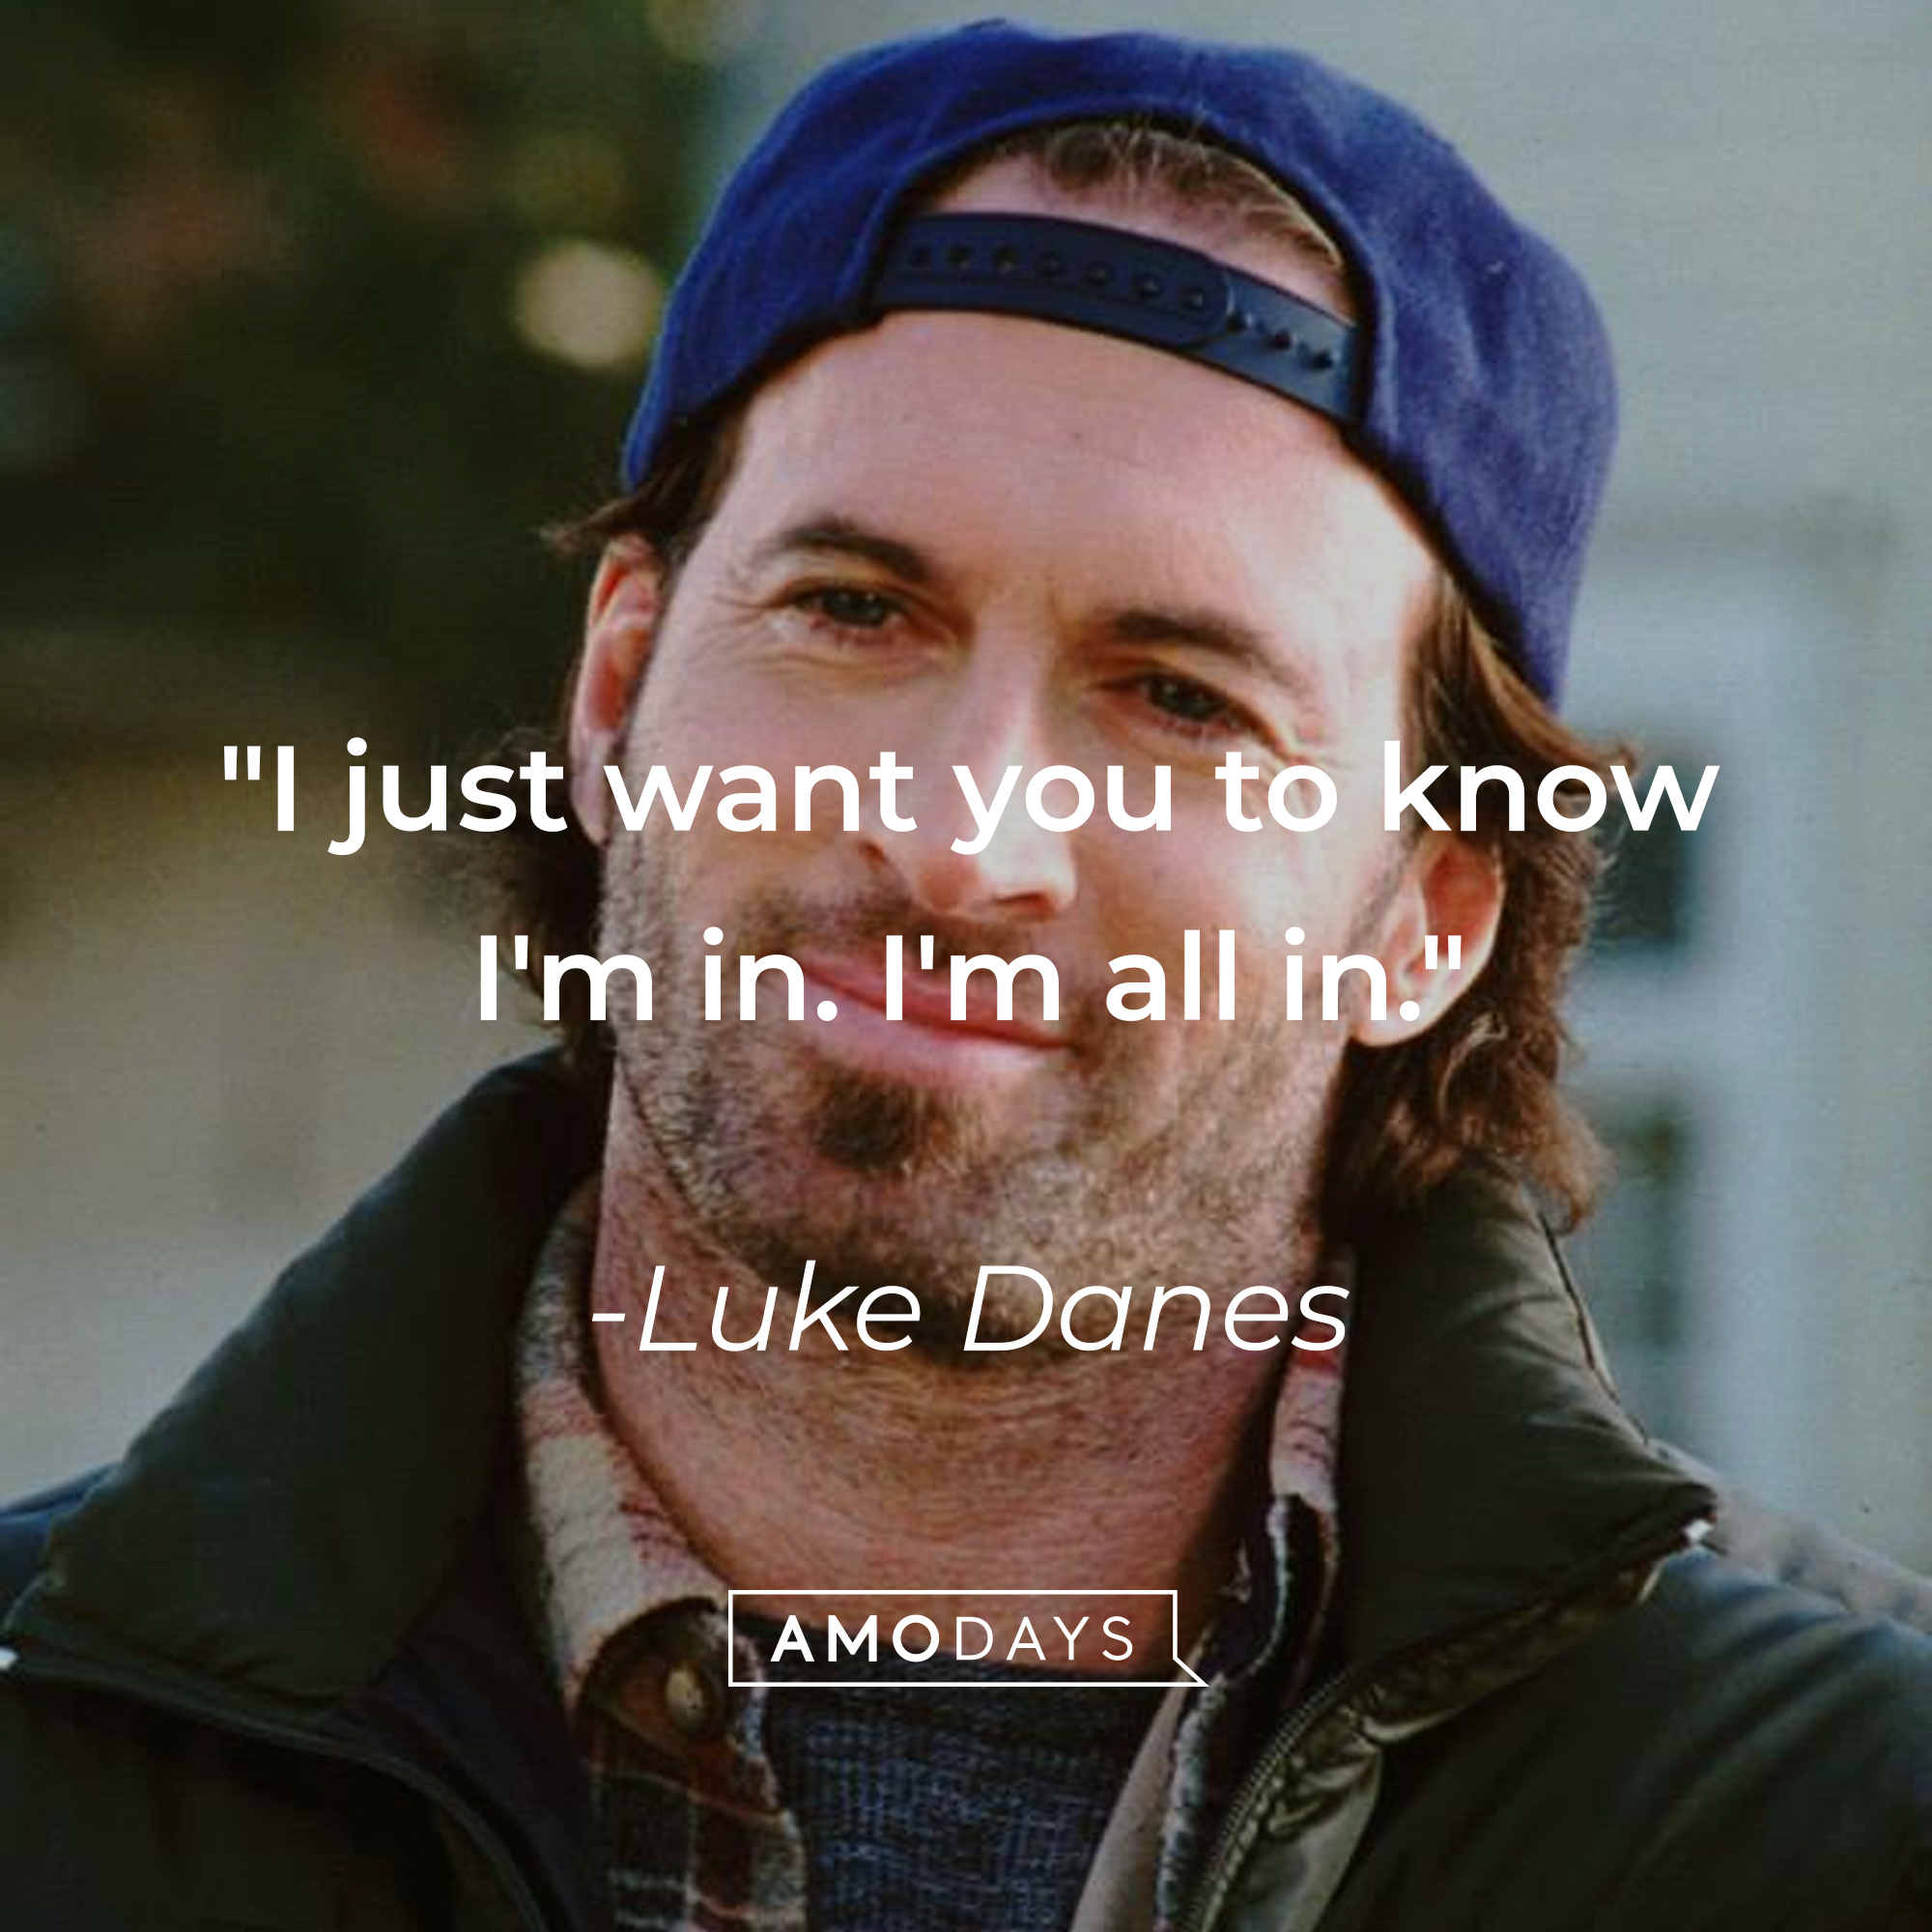 Luke Danes' quote: "I just want you to know I'm in. I'm all in." | Source: Facebook/GilmoreGirls